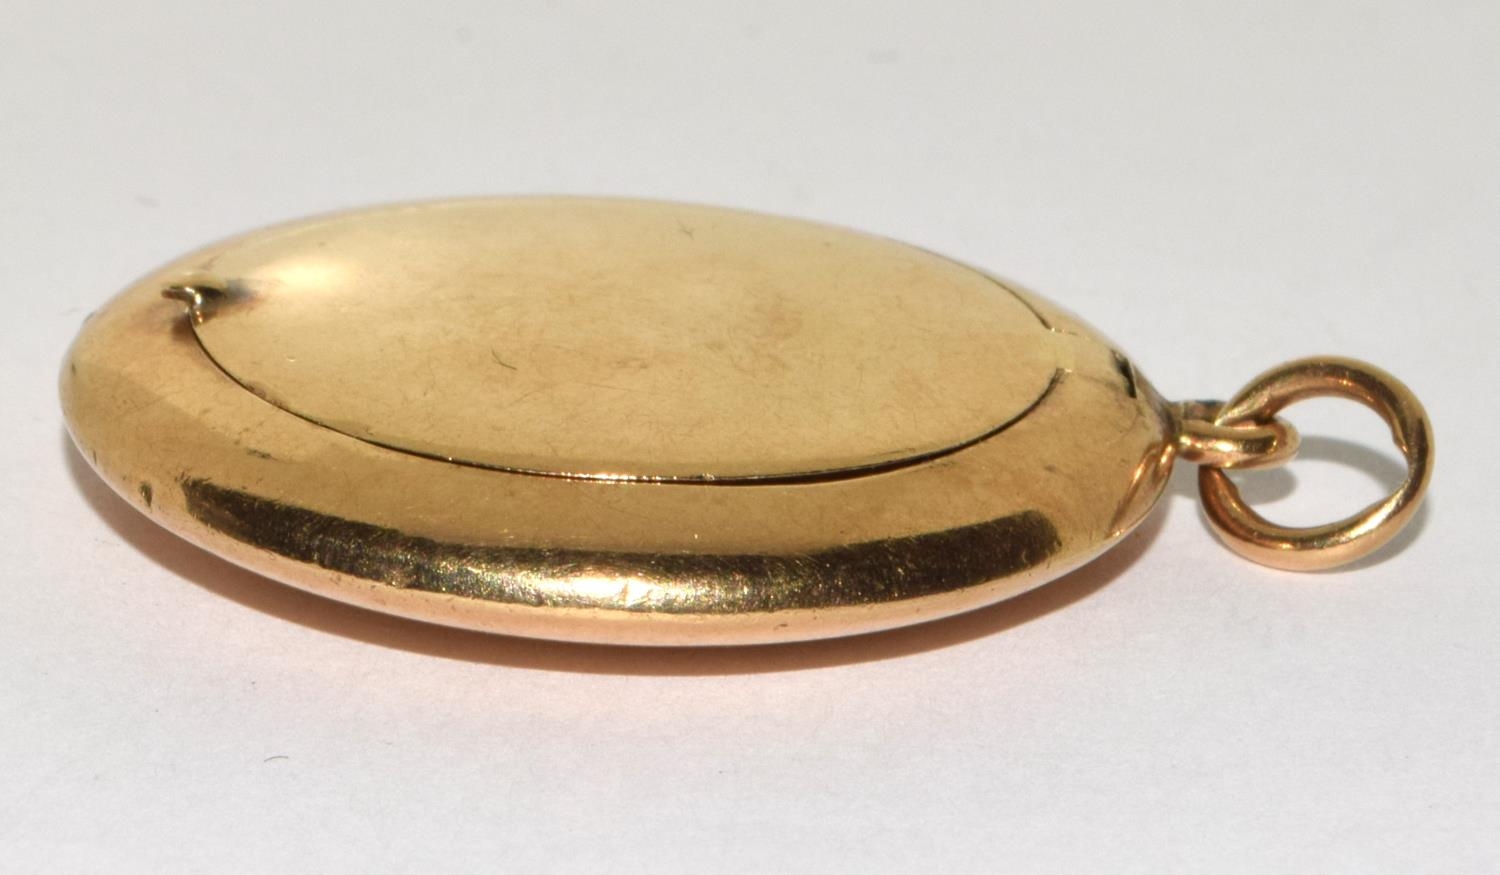 9ct gold ladies small size compact fob total 14g - Image 2 of 5